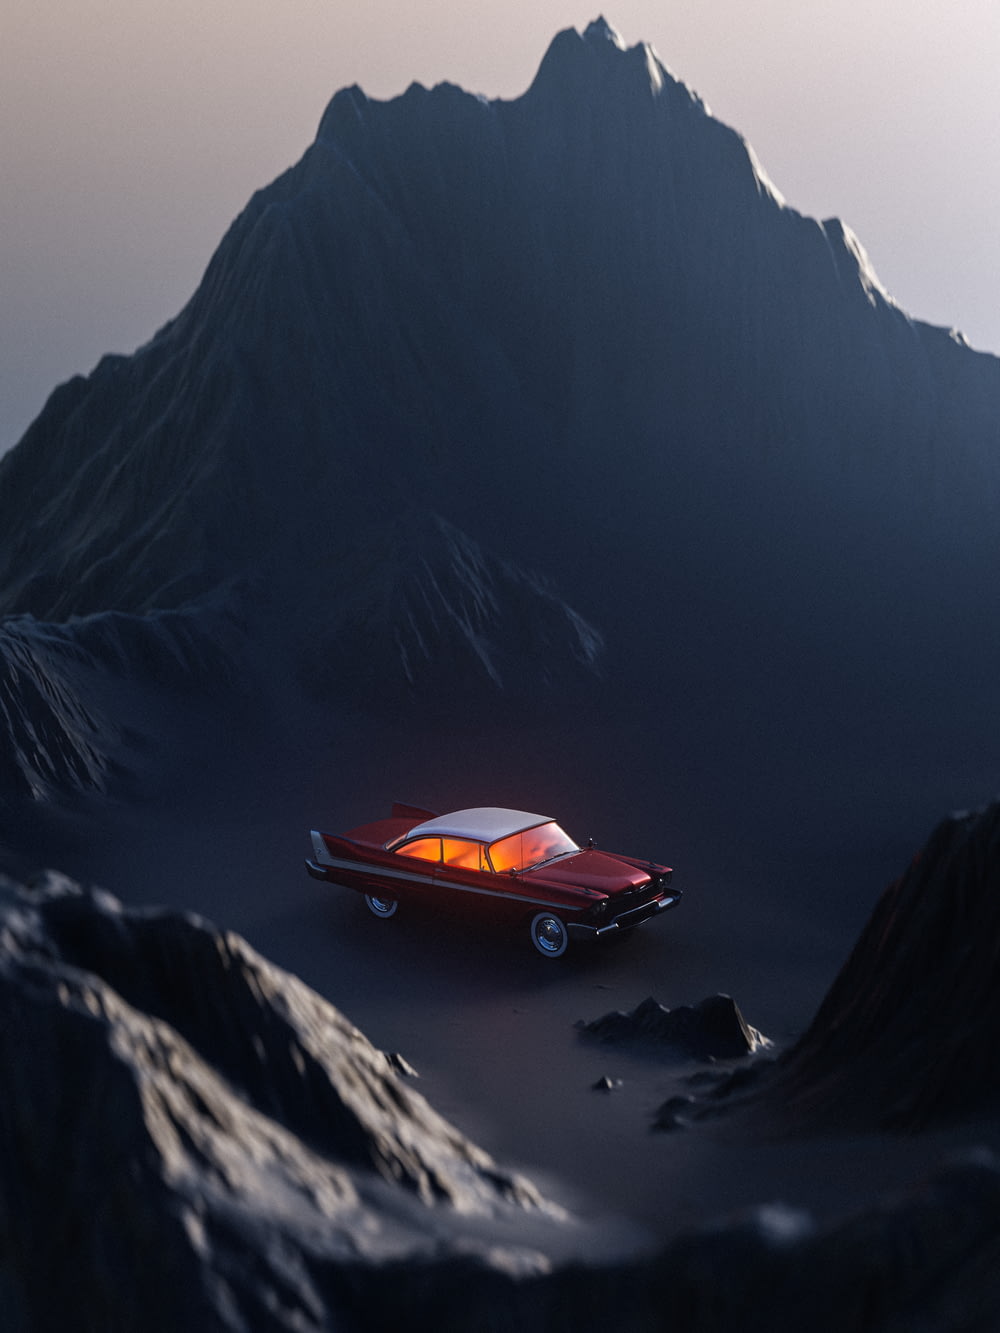 a red car parked on a rocky surface with mountains in the background